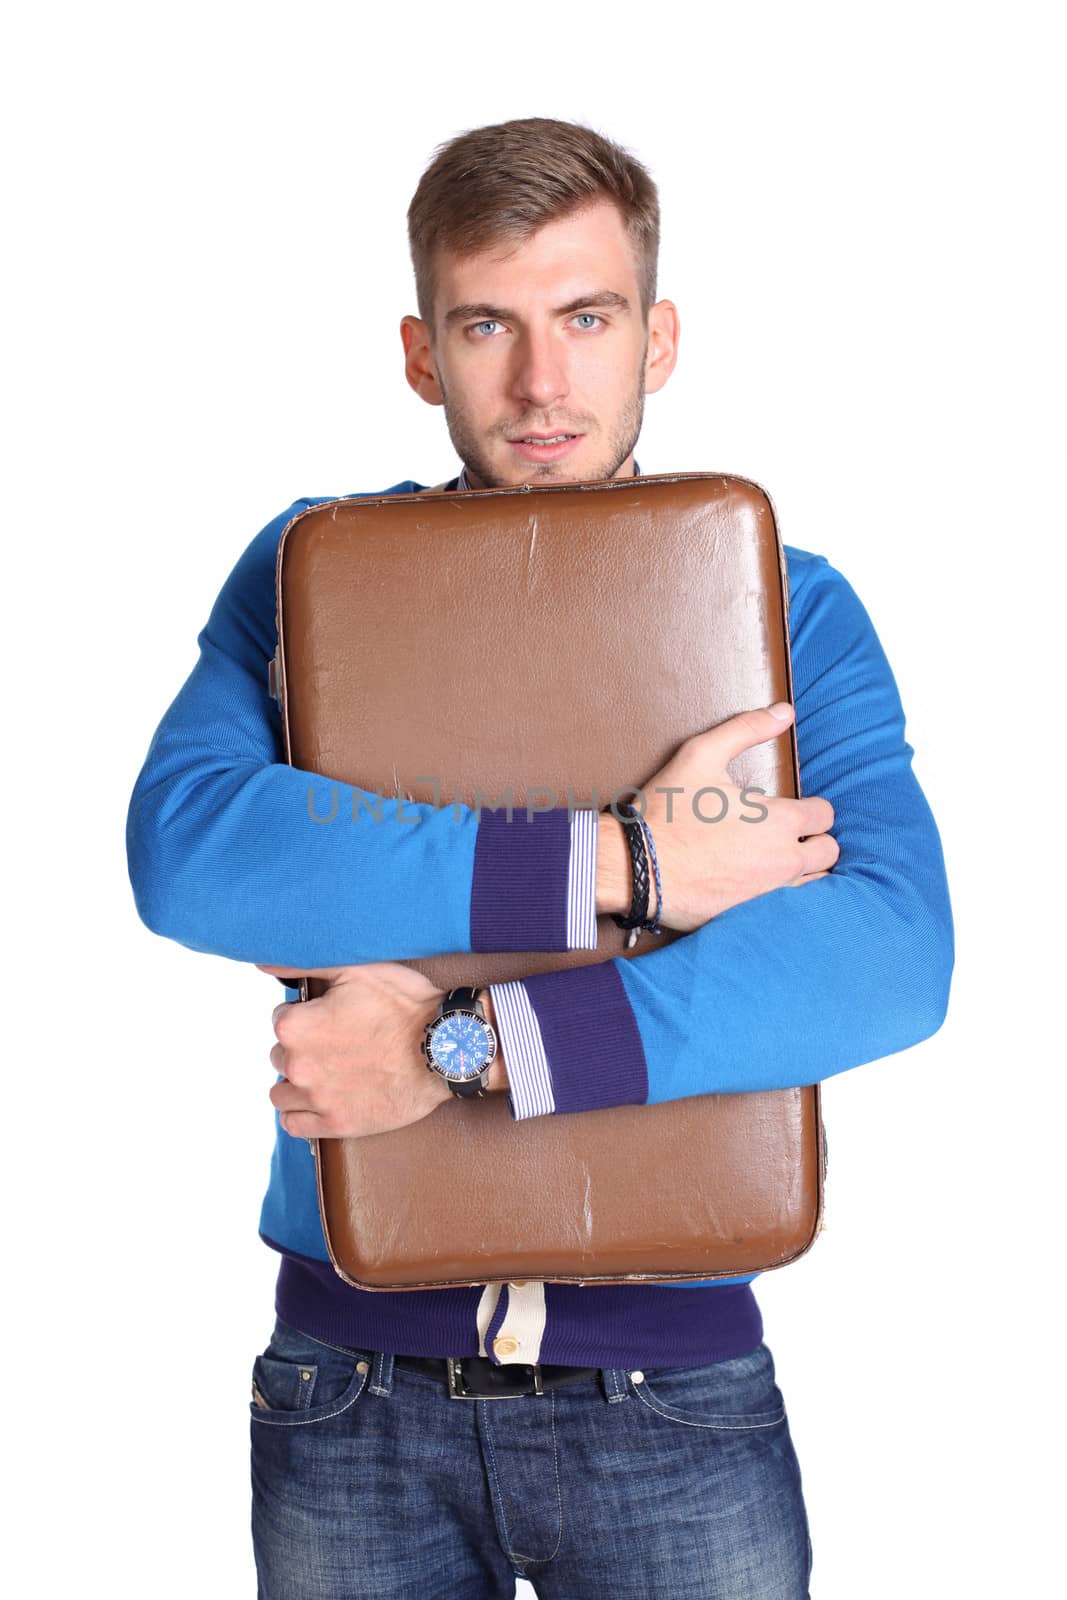 A young man carrying a suitcase by andersonrise